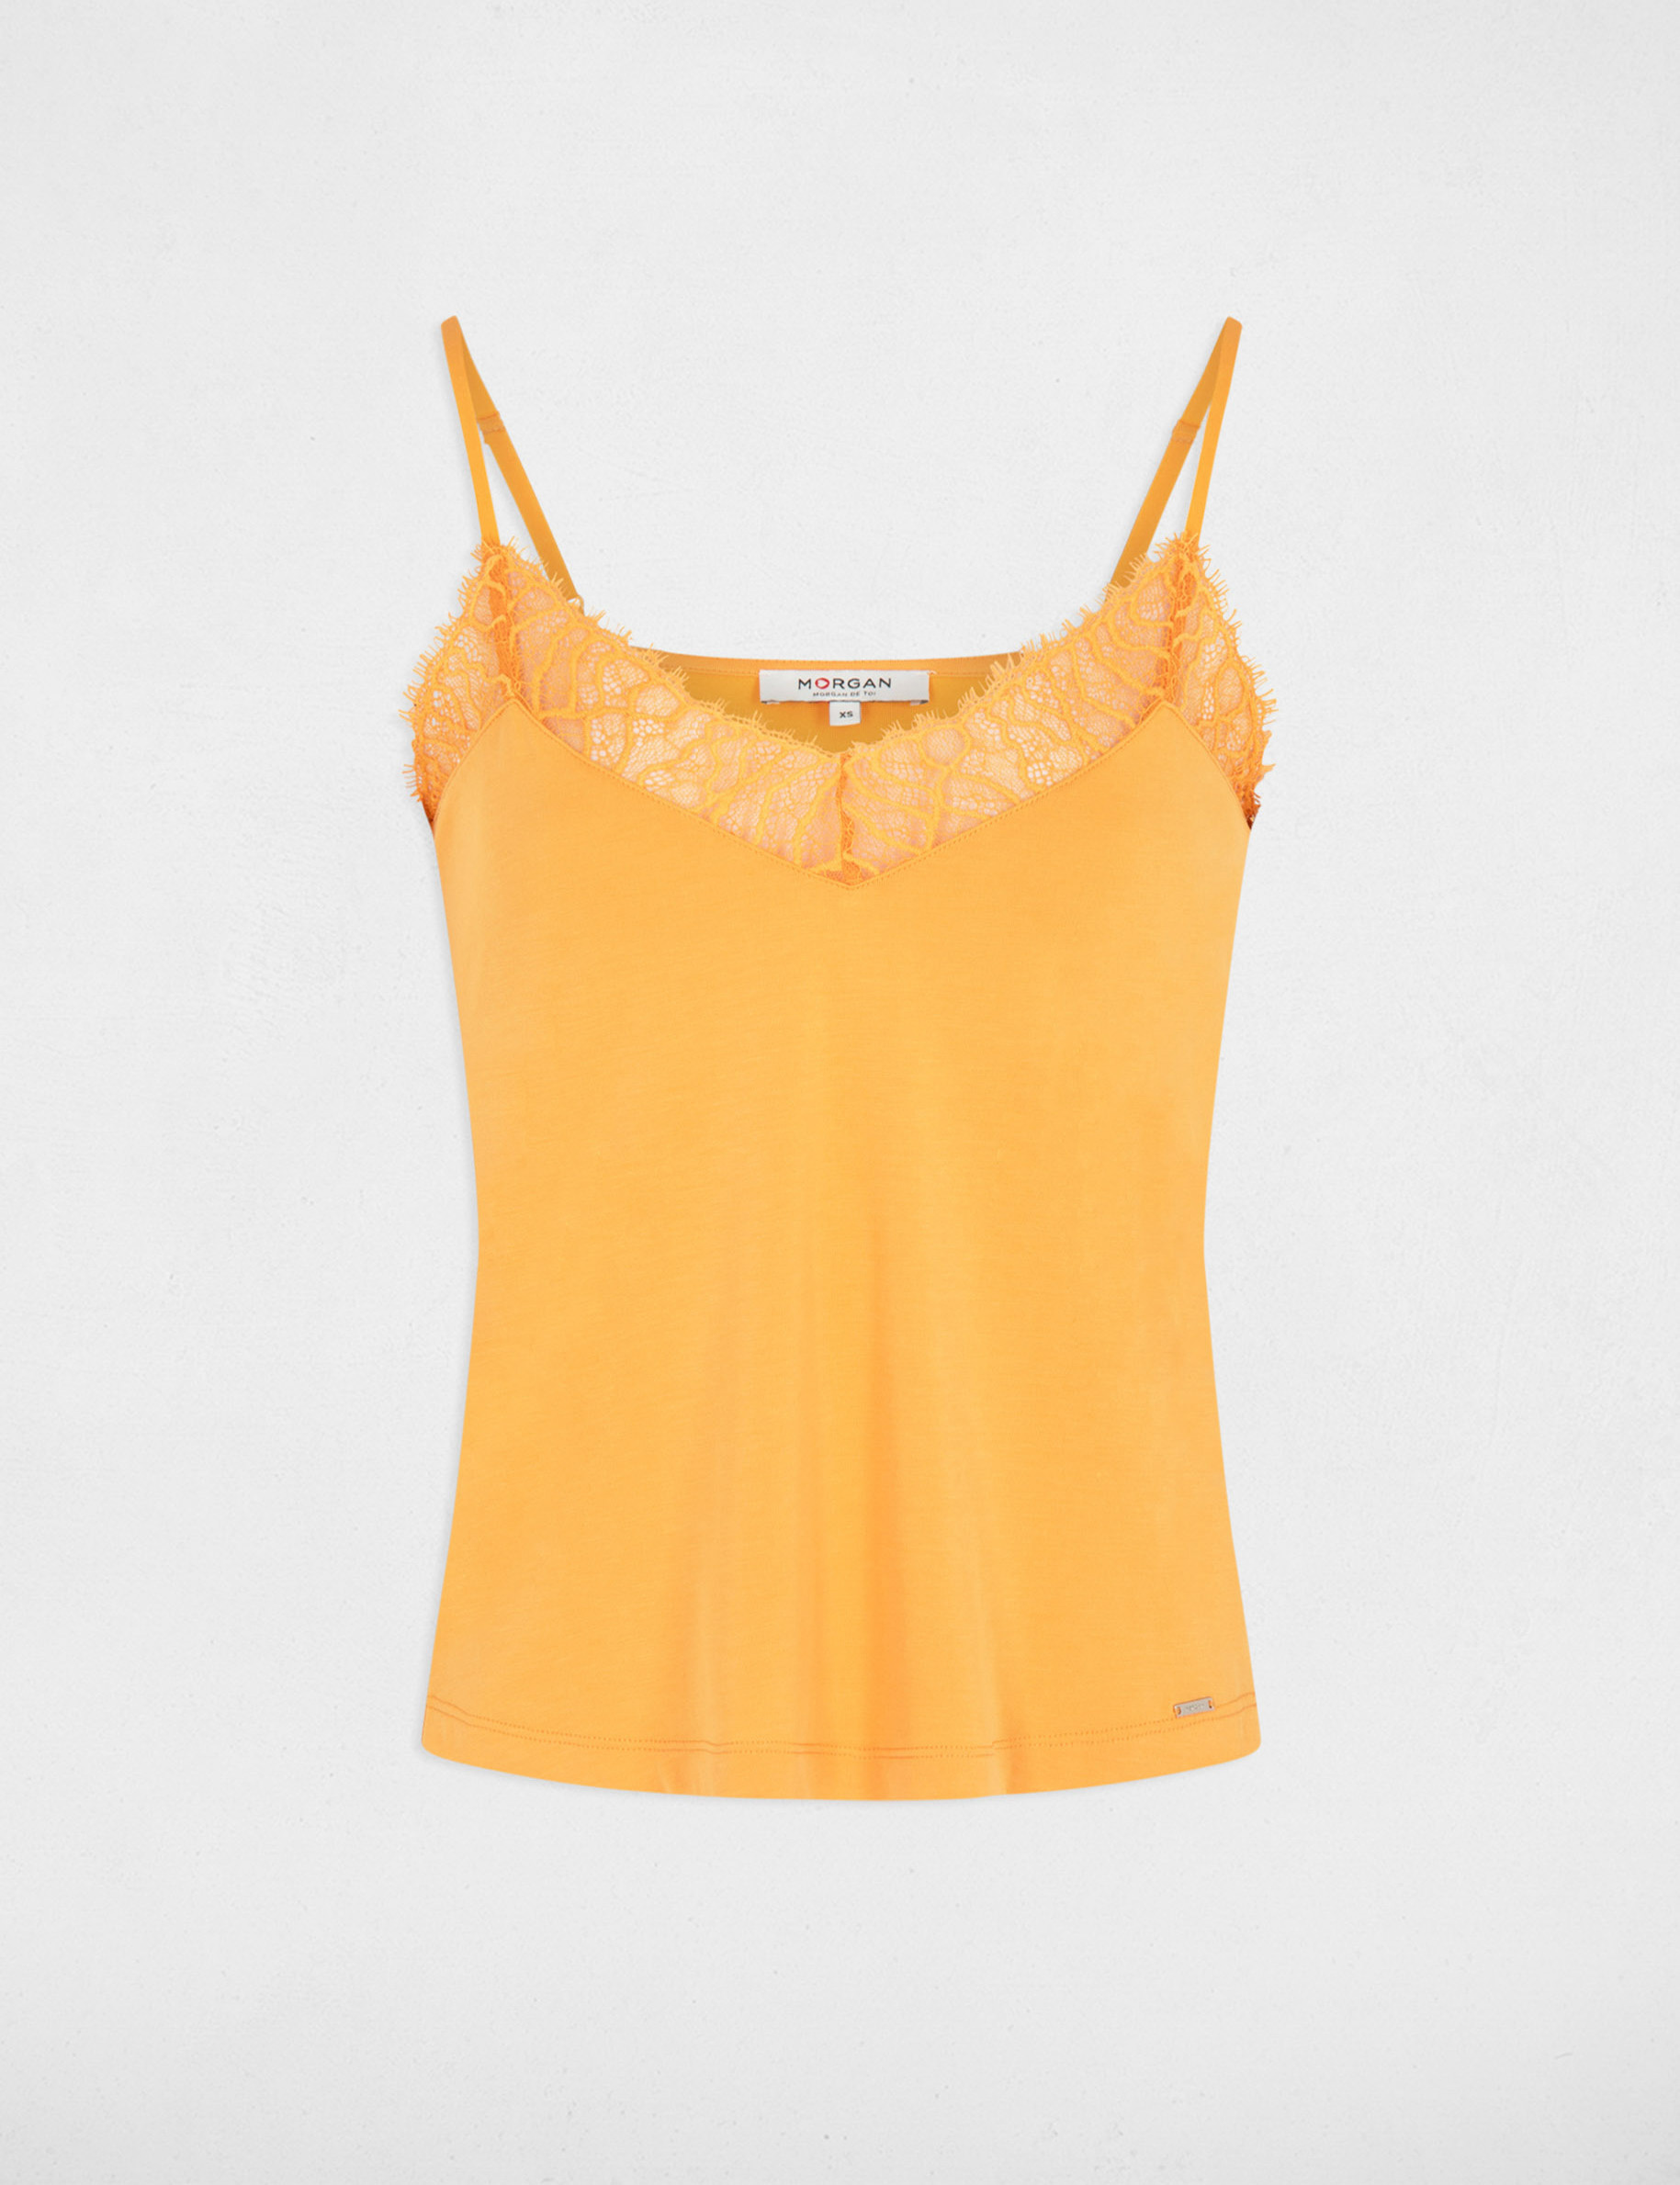 Vest top with thin straps and lace orange ladies'